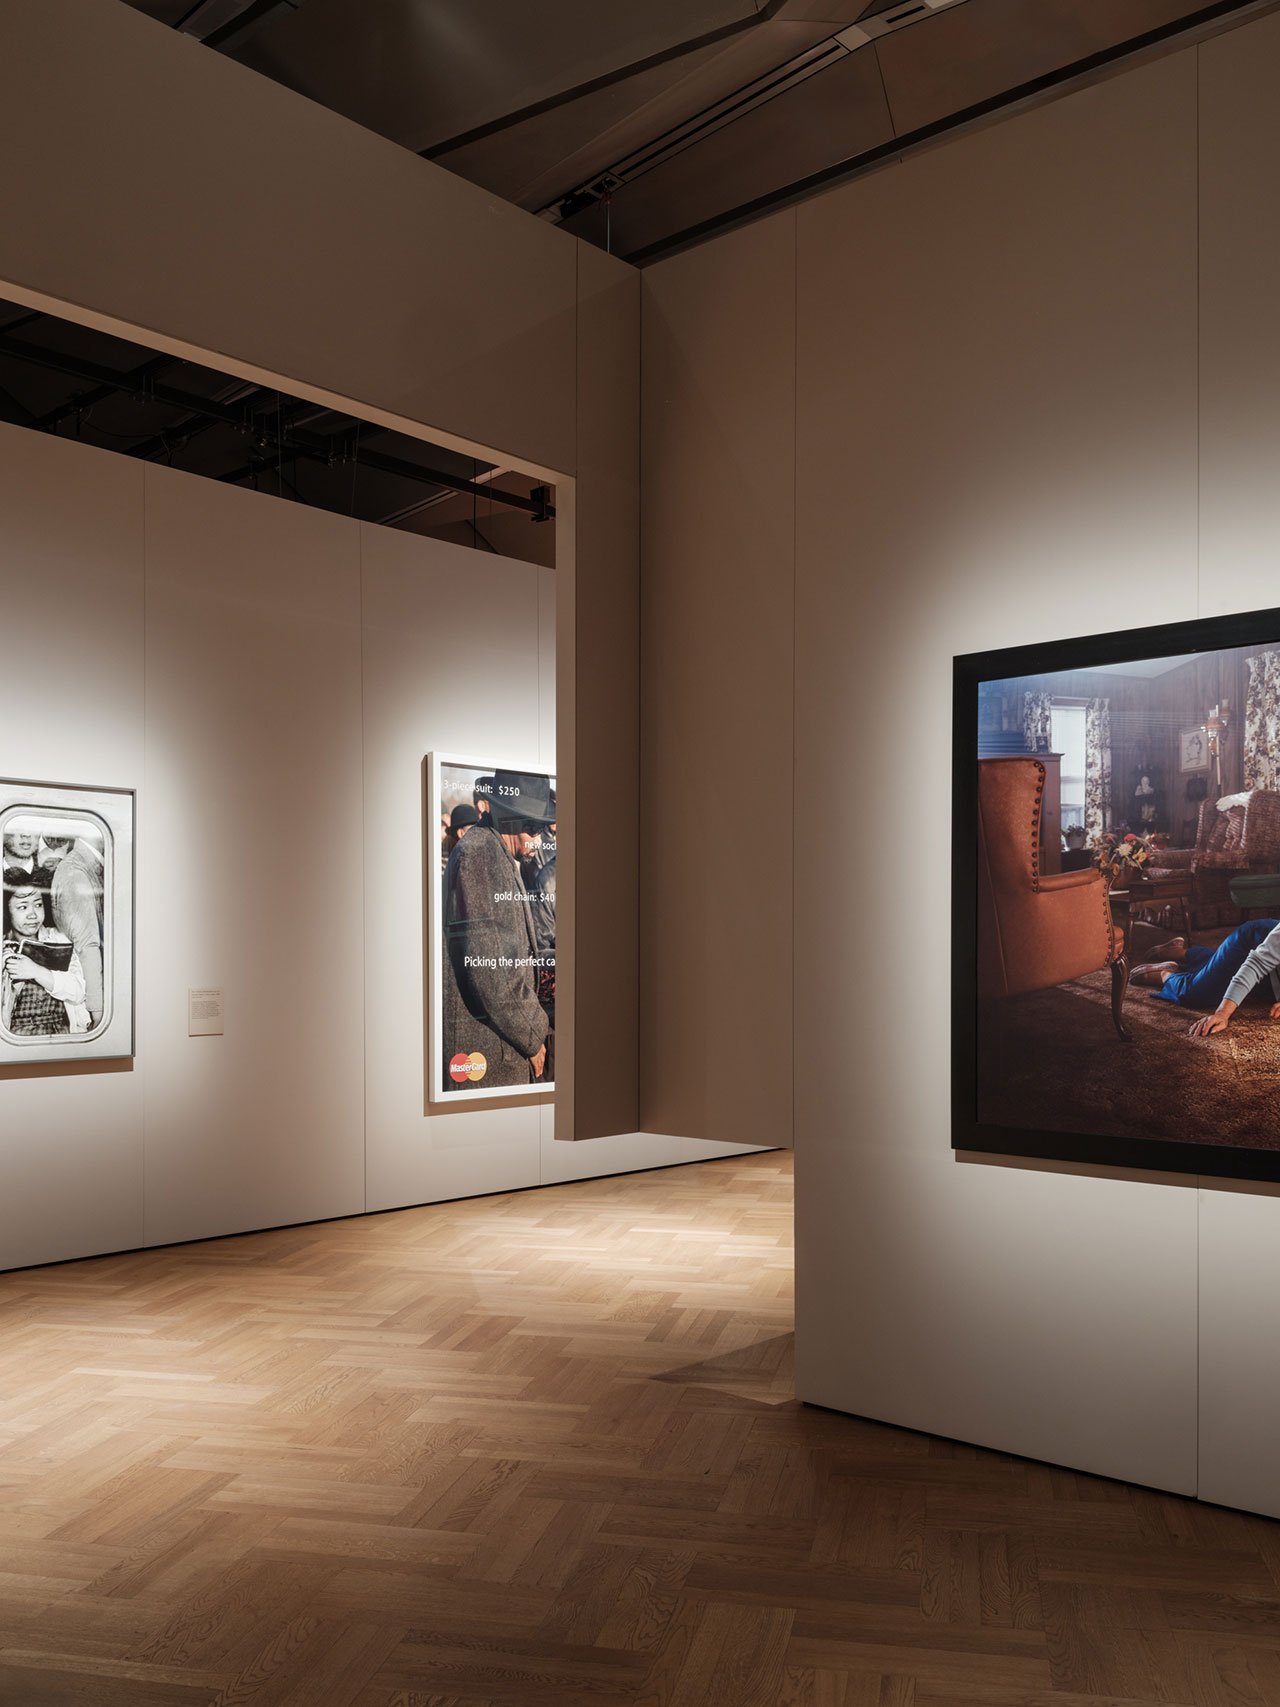 Installation view of "Fragile Beauty" at V&amp;A, South Kensington.
Photography © James Retief.